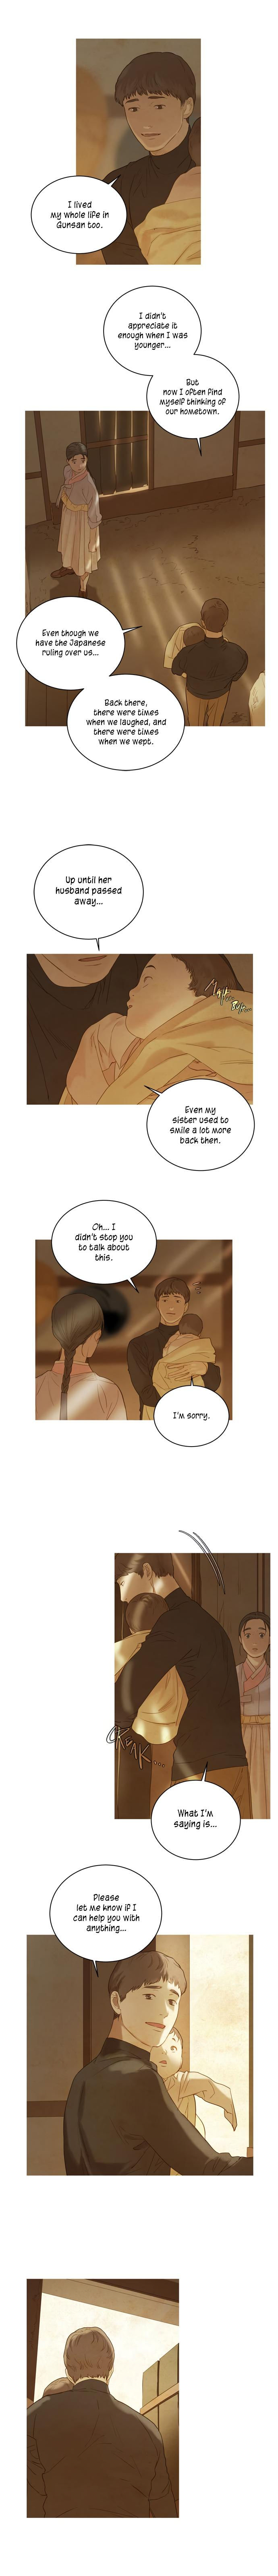 Gorae Byul - The Gyeongseong Mermaid - Chapter 37 Page 11